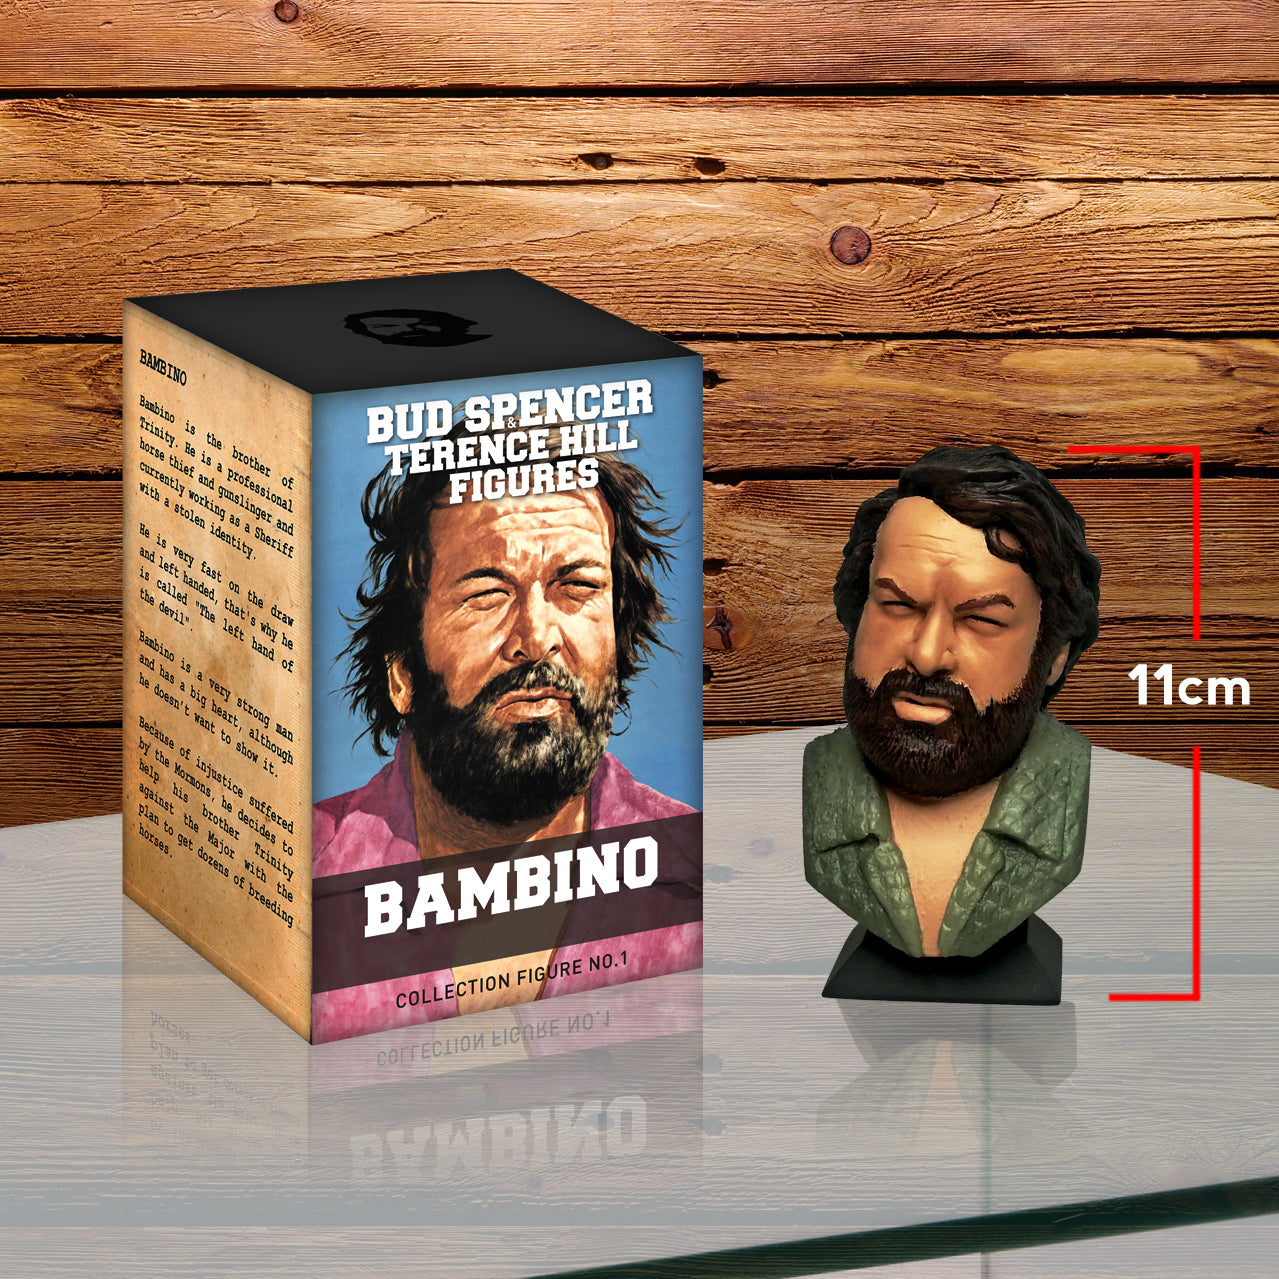 Bambino Bud Spencer Terence Hill Figure Collection No 1 Bambino Bud Spencer Official